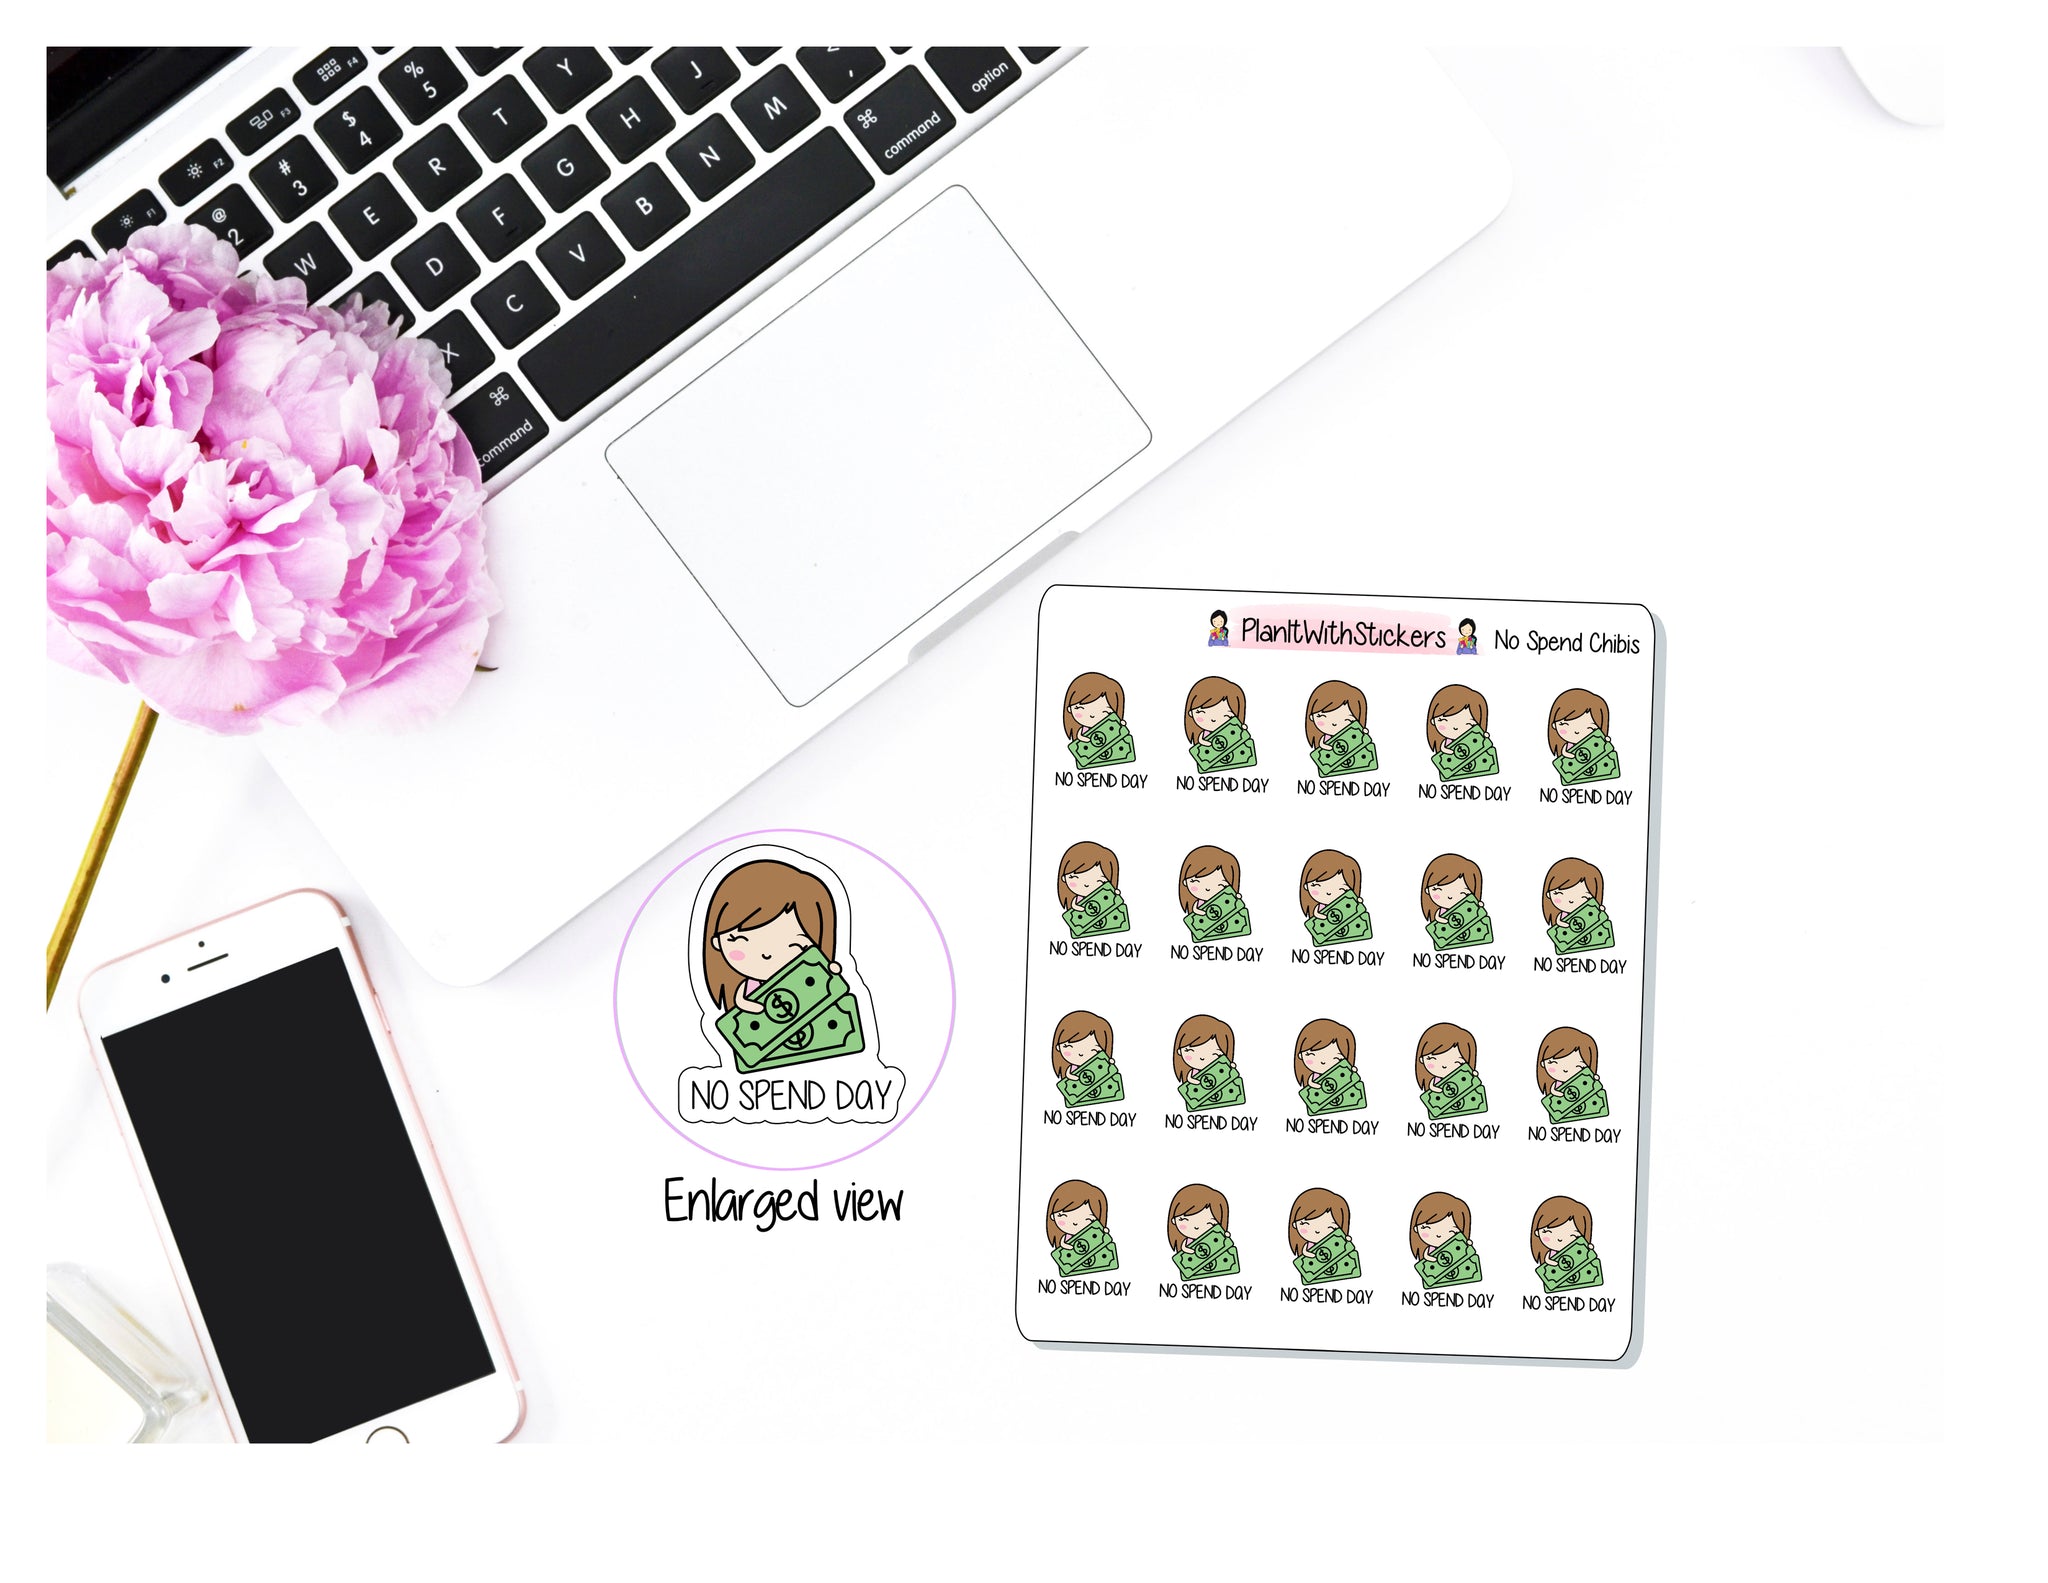 No Spend Chibi Money Finance Character Sticker for , Plum Paper, Recollections, and similar planners